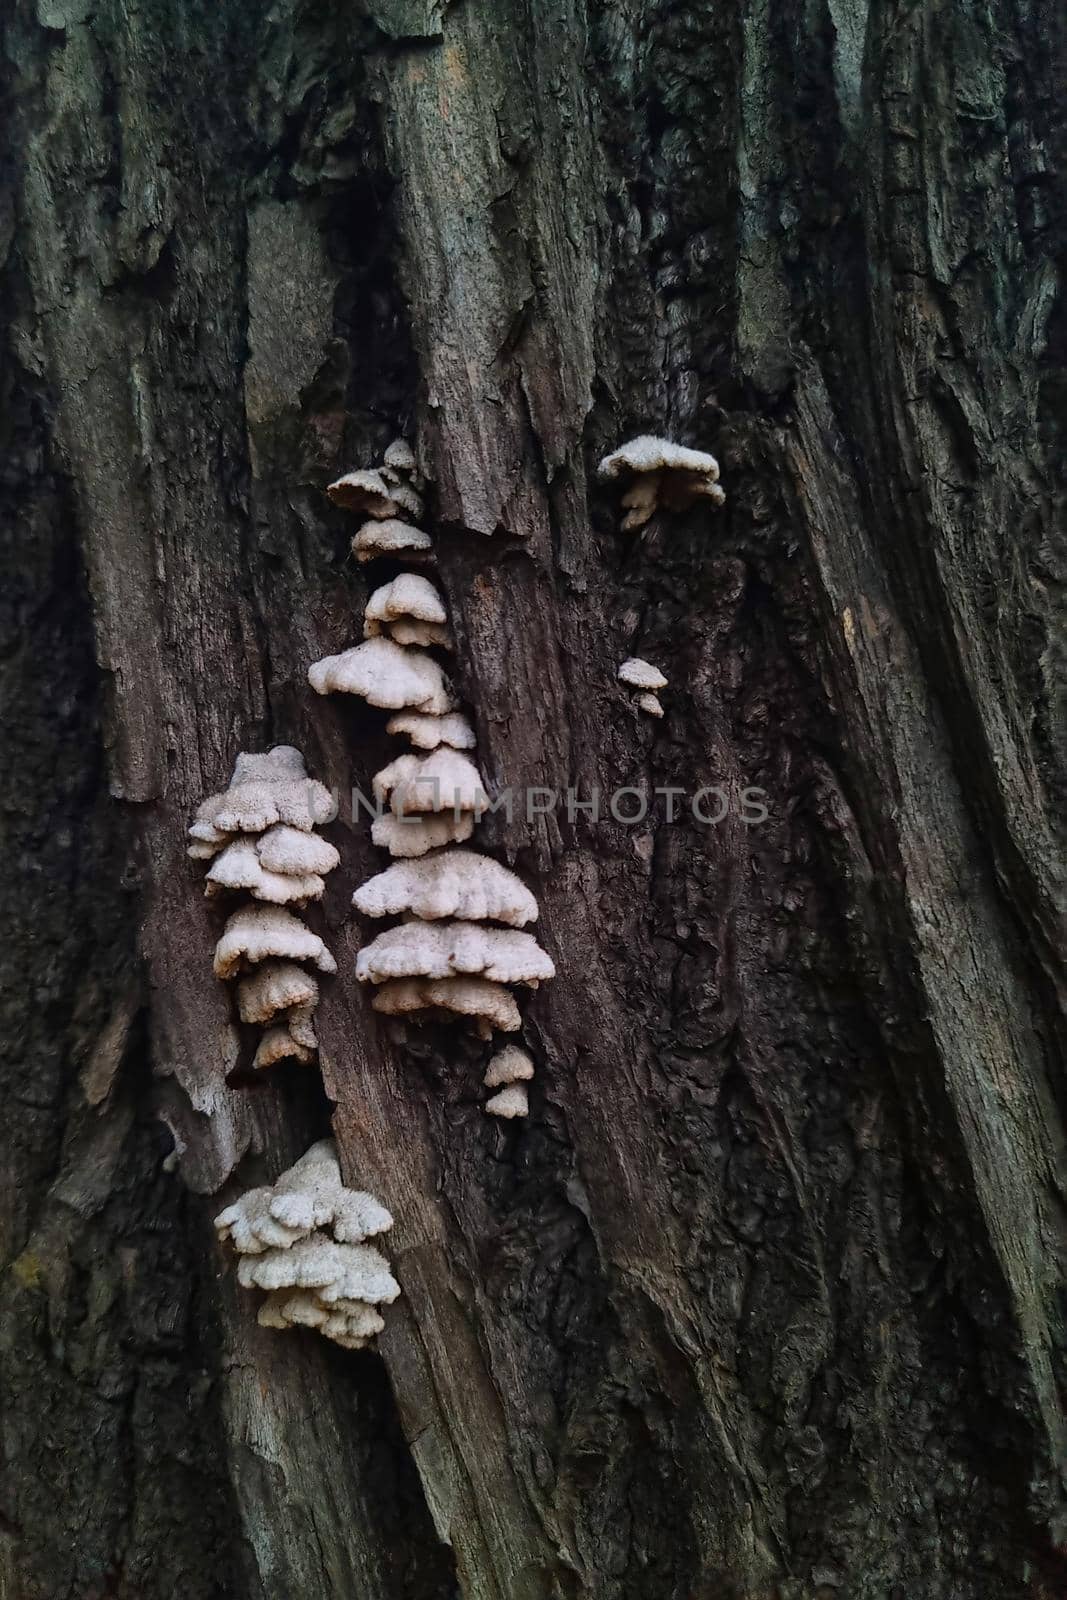 Mushrooms grow on the trunk of the tree in the forest. by kip02kas